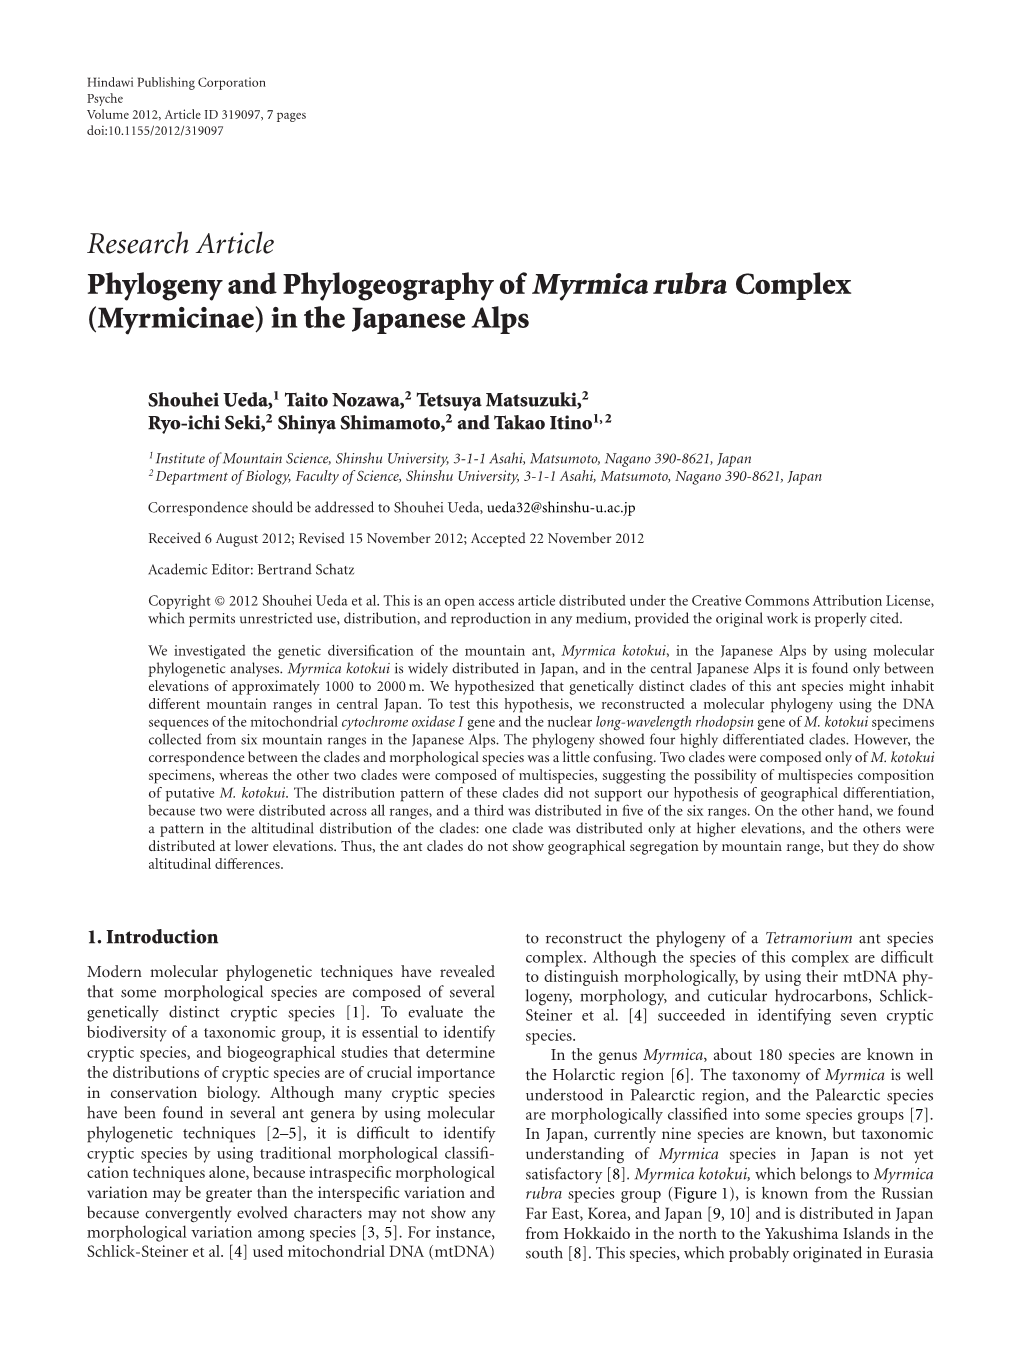 Phylogeny and Phylogeography of Myrmica Rubra Complex (Myrmicinae) in the Japanese Alps